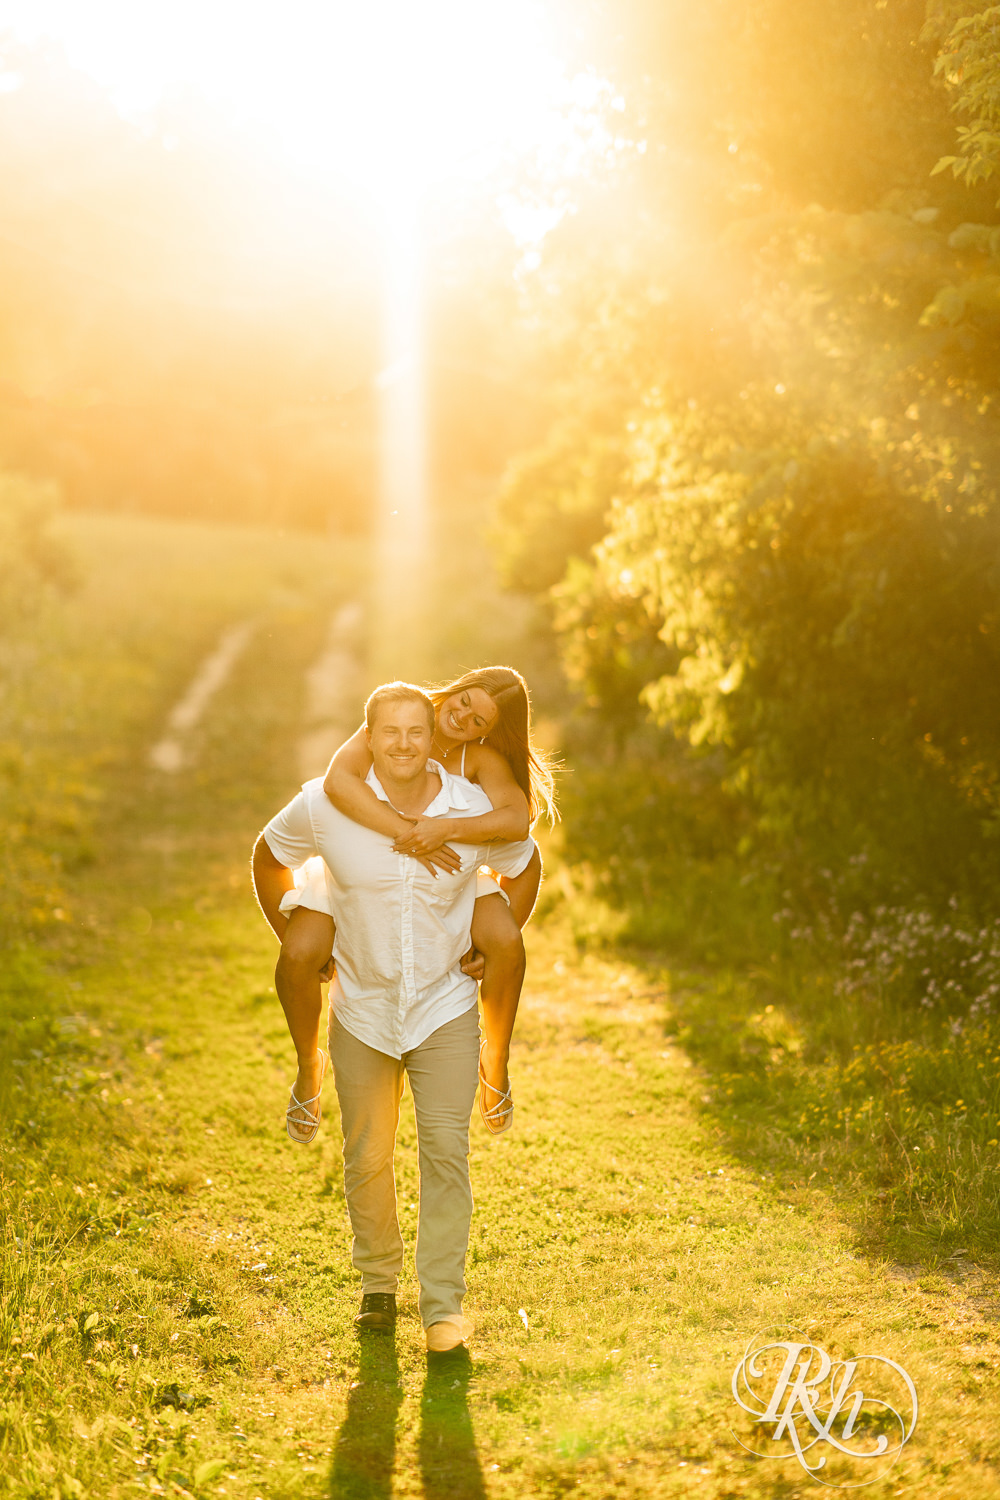 Man in white shirt carries woman in white dress on back during golden hour engagement photography at Lebanon Hills in Eagan, Minnesota.